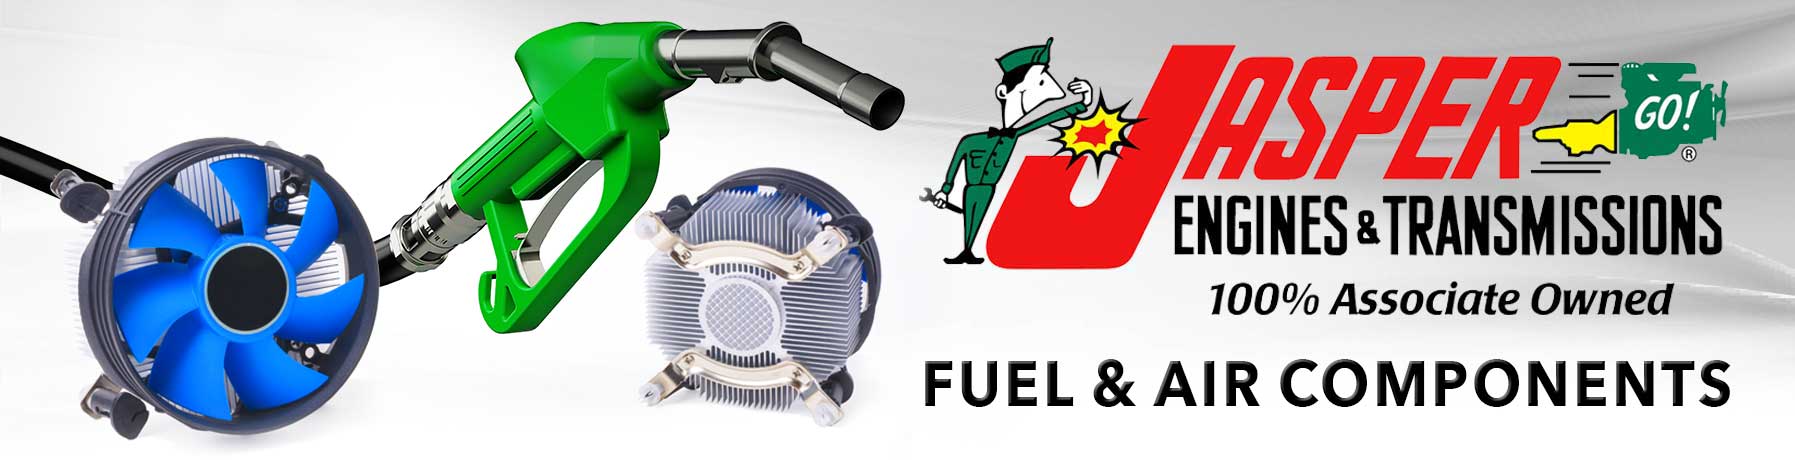 Jasper Engines and Transmissions 100% Associate Owned Fuel & Air Components